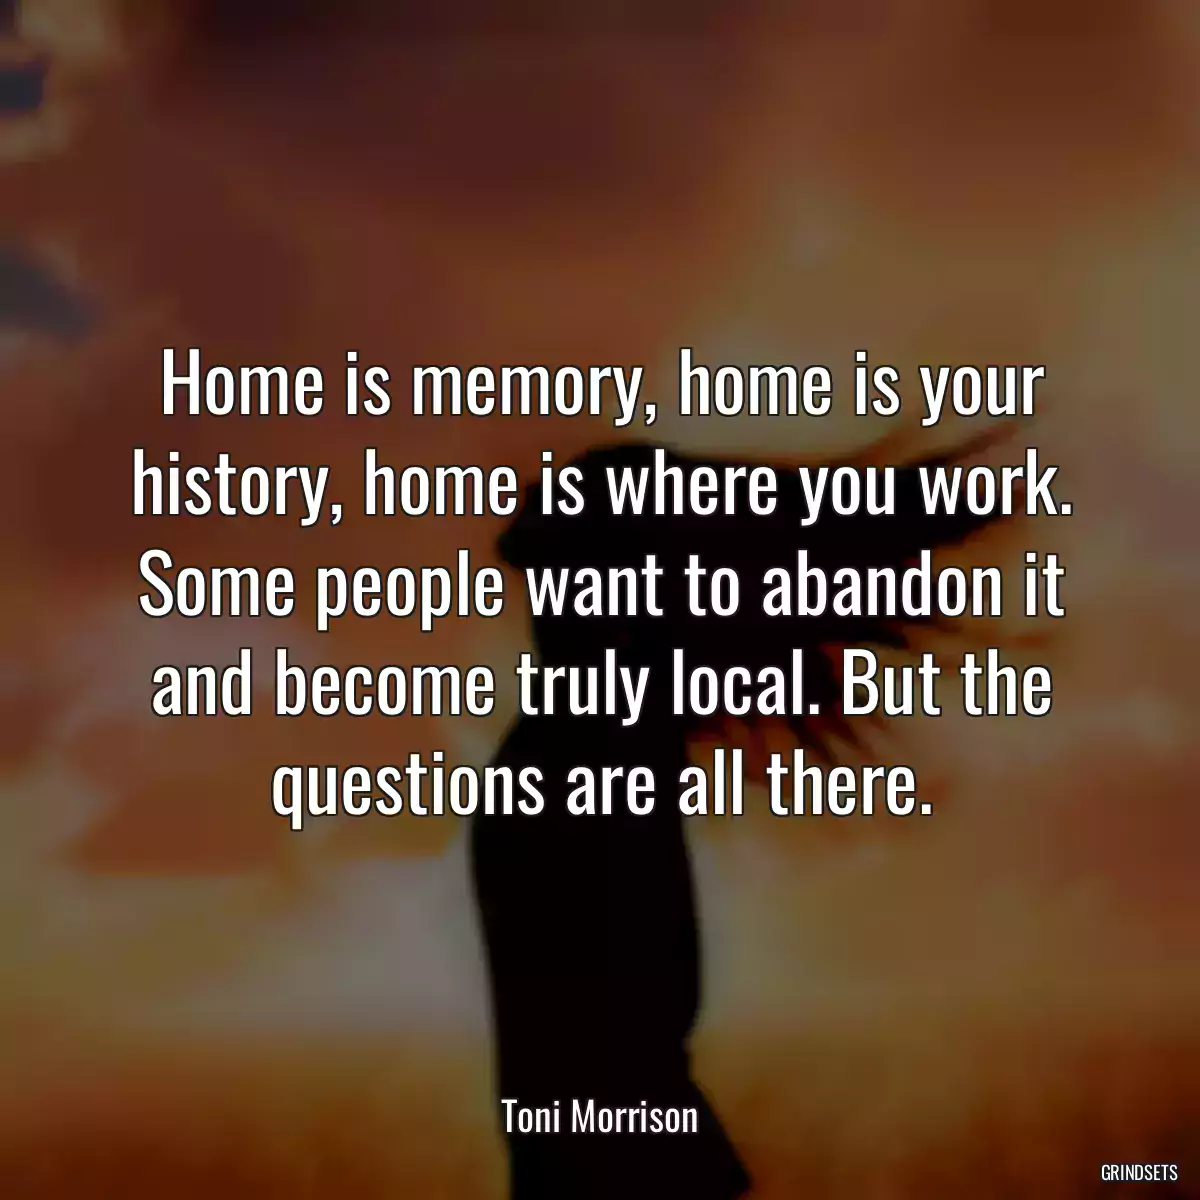 Home is memory, home is your history, home is where you work. Some people want to abandon it and become truly local. But the questions are all there.